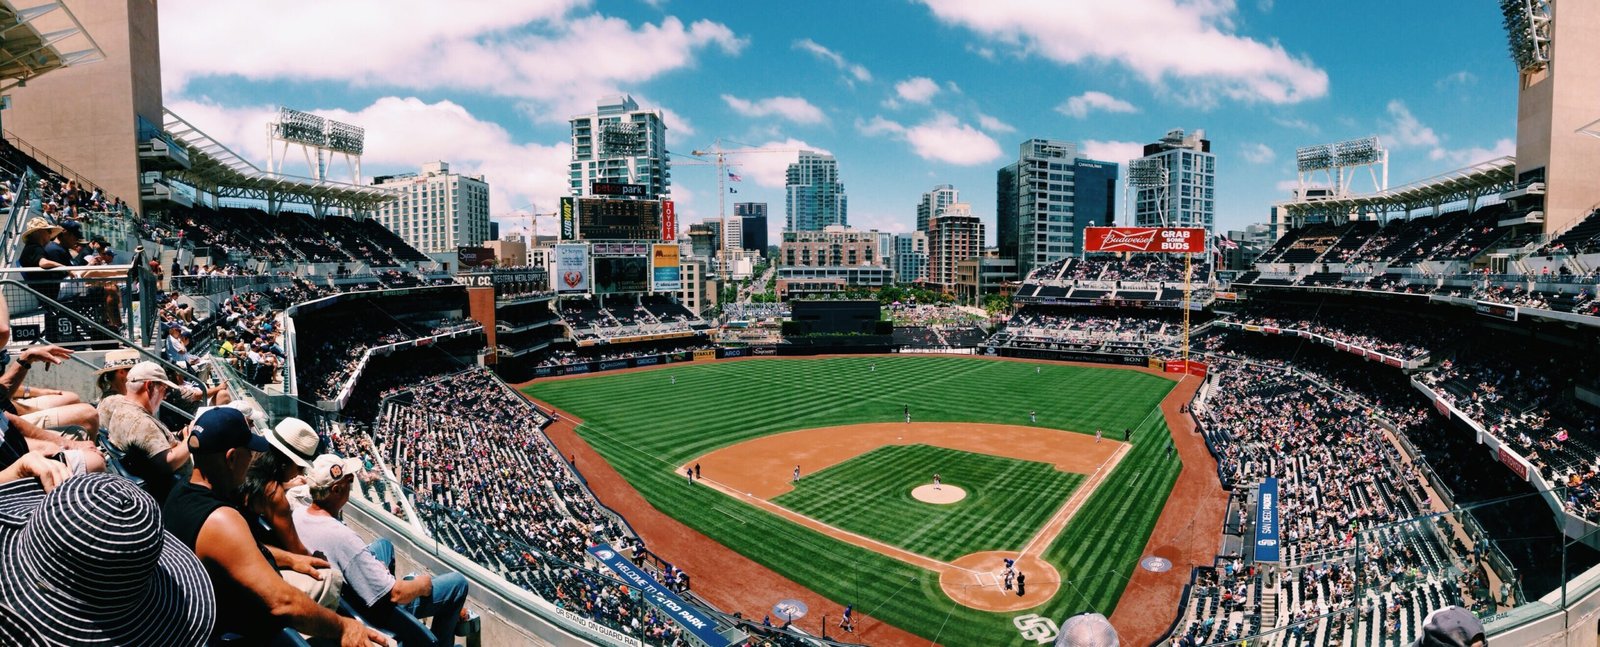 How CohnReznick Powers The Business Of Baseball #CohnReznick #Powers #Business #Baseball